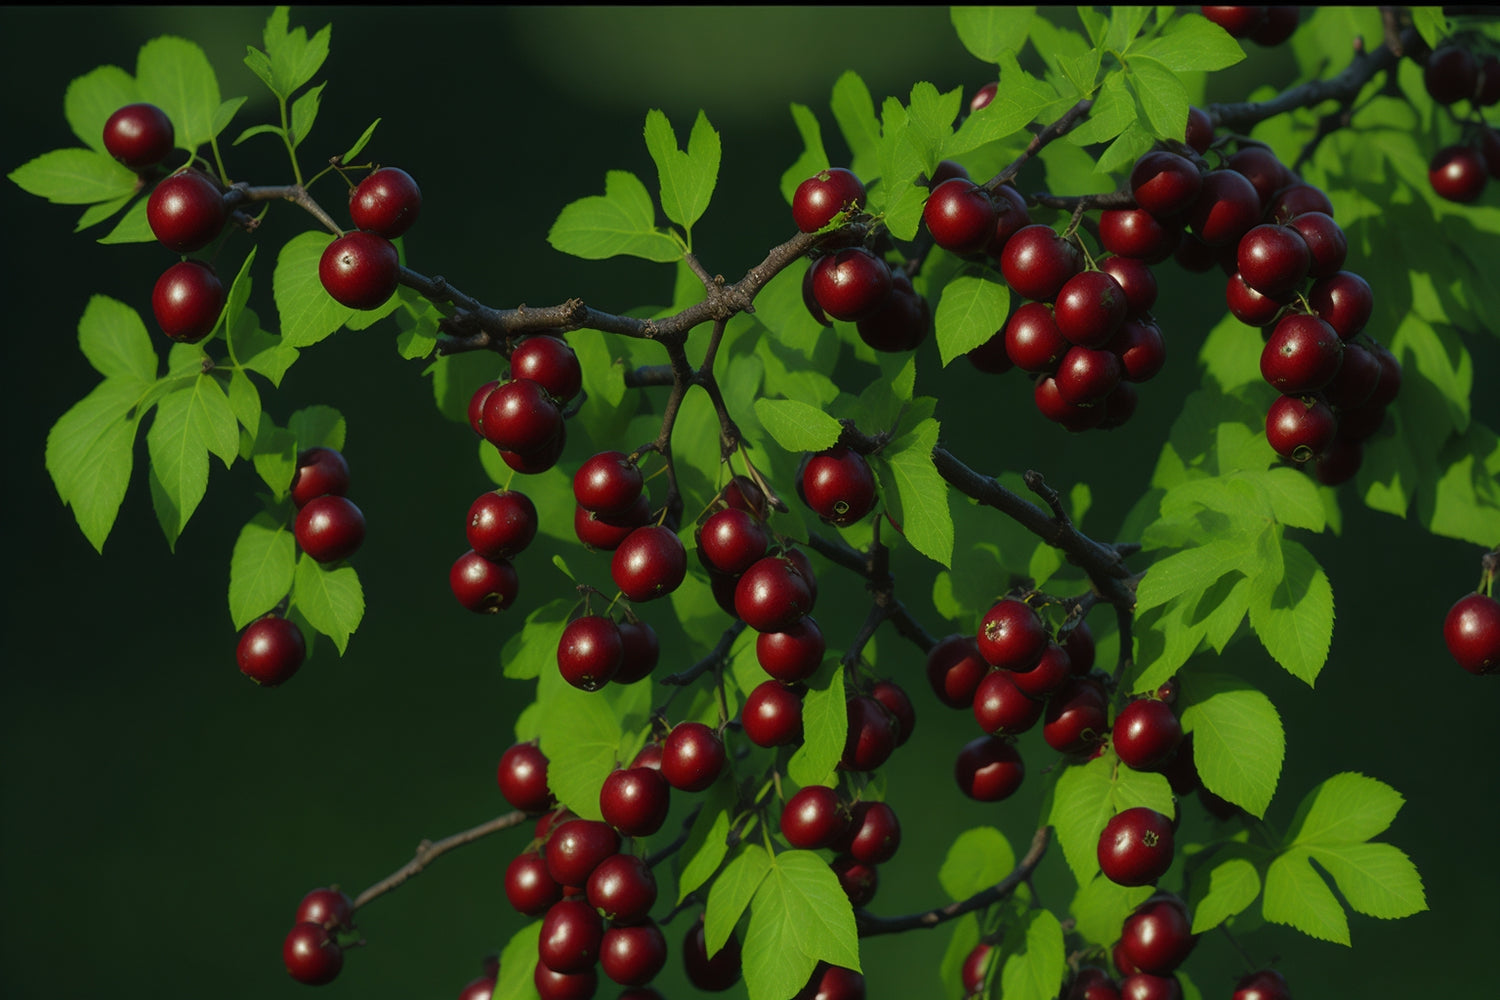 A vibrant close-up of a hawthorn tree branch, its berries glistening in the sunlight